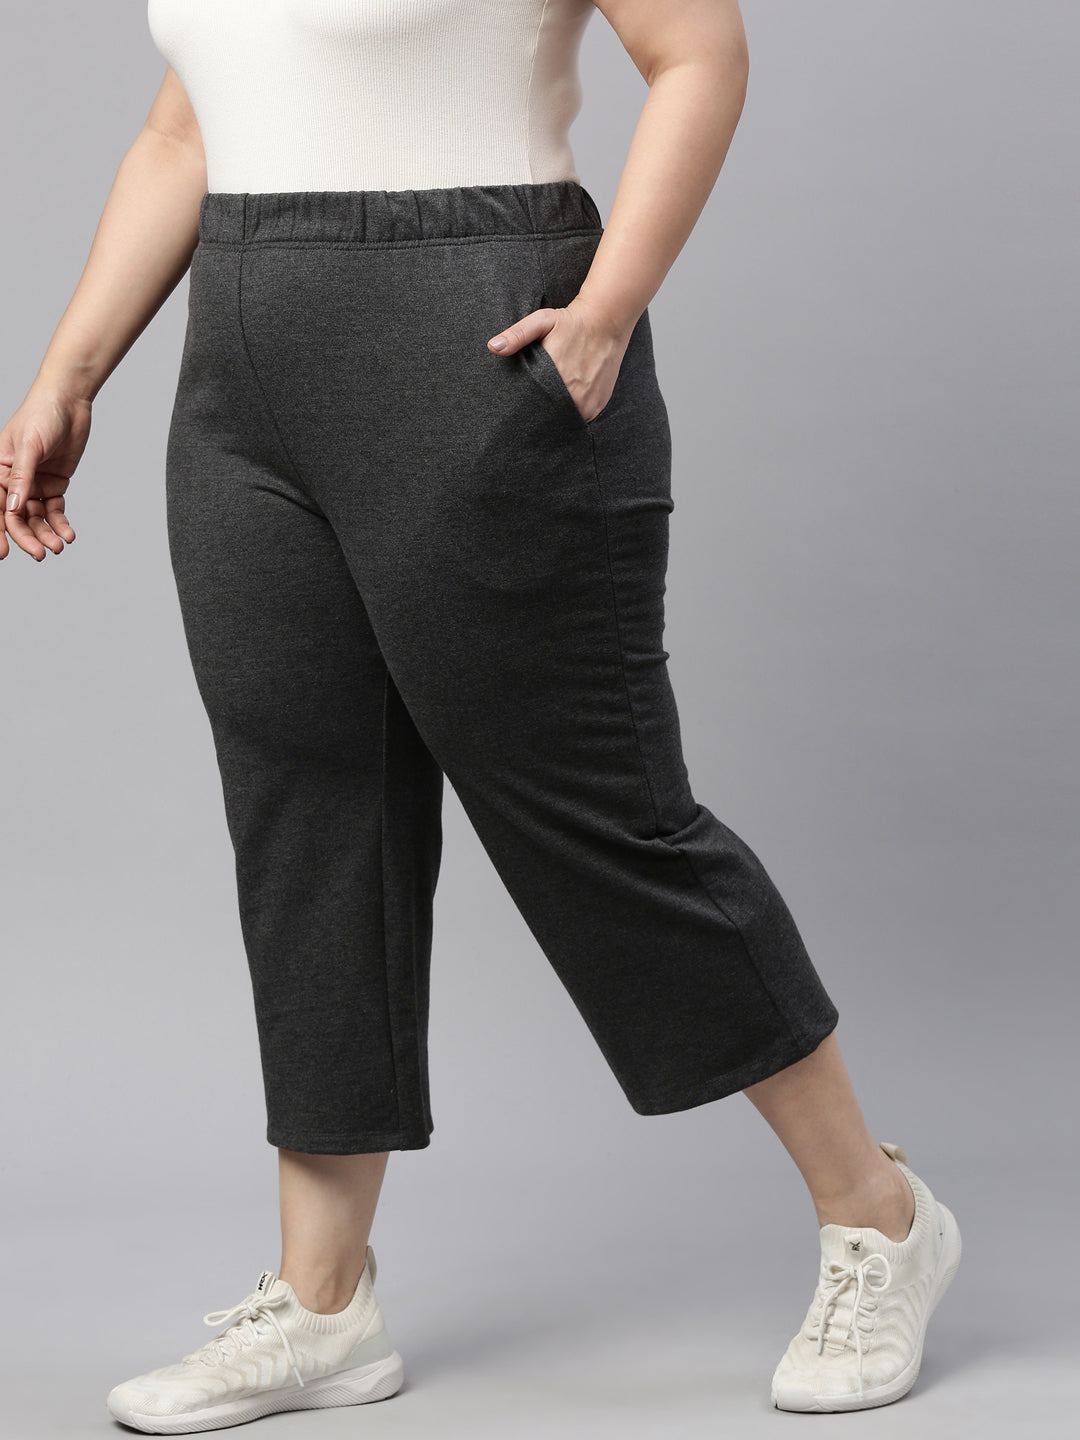 Plus Size Grey three fourth pants For Women XXL to 6XL  The Pink Moon